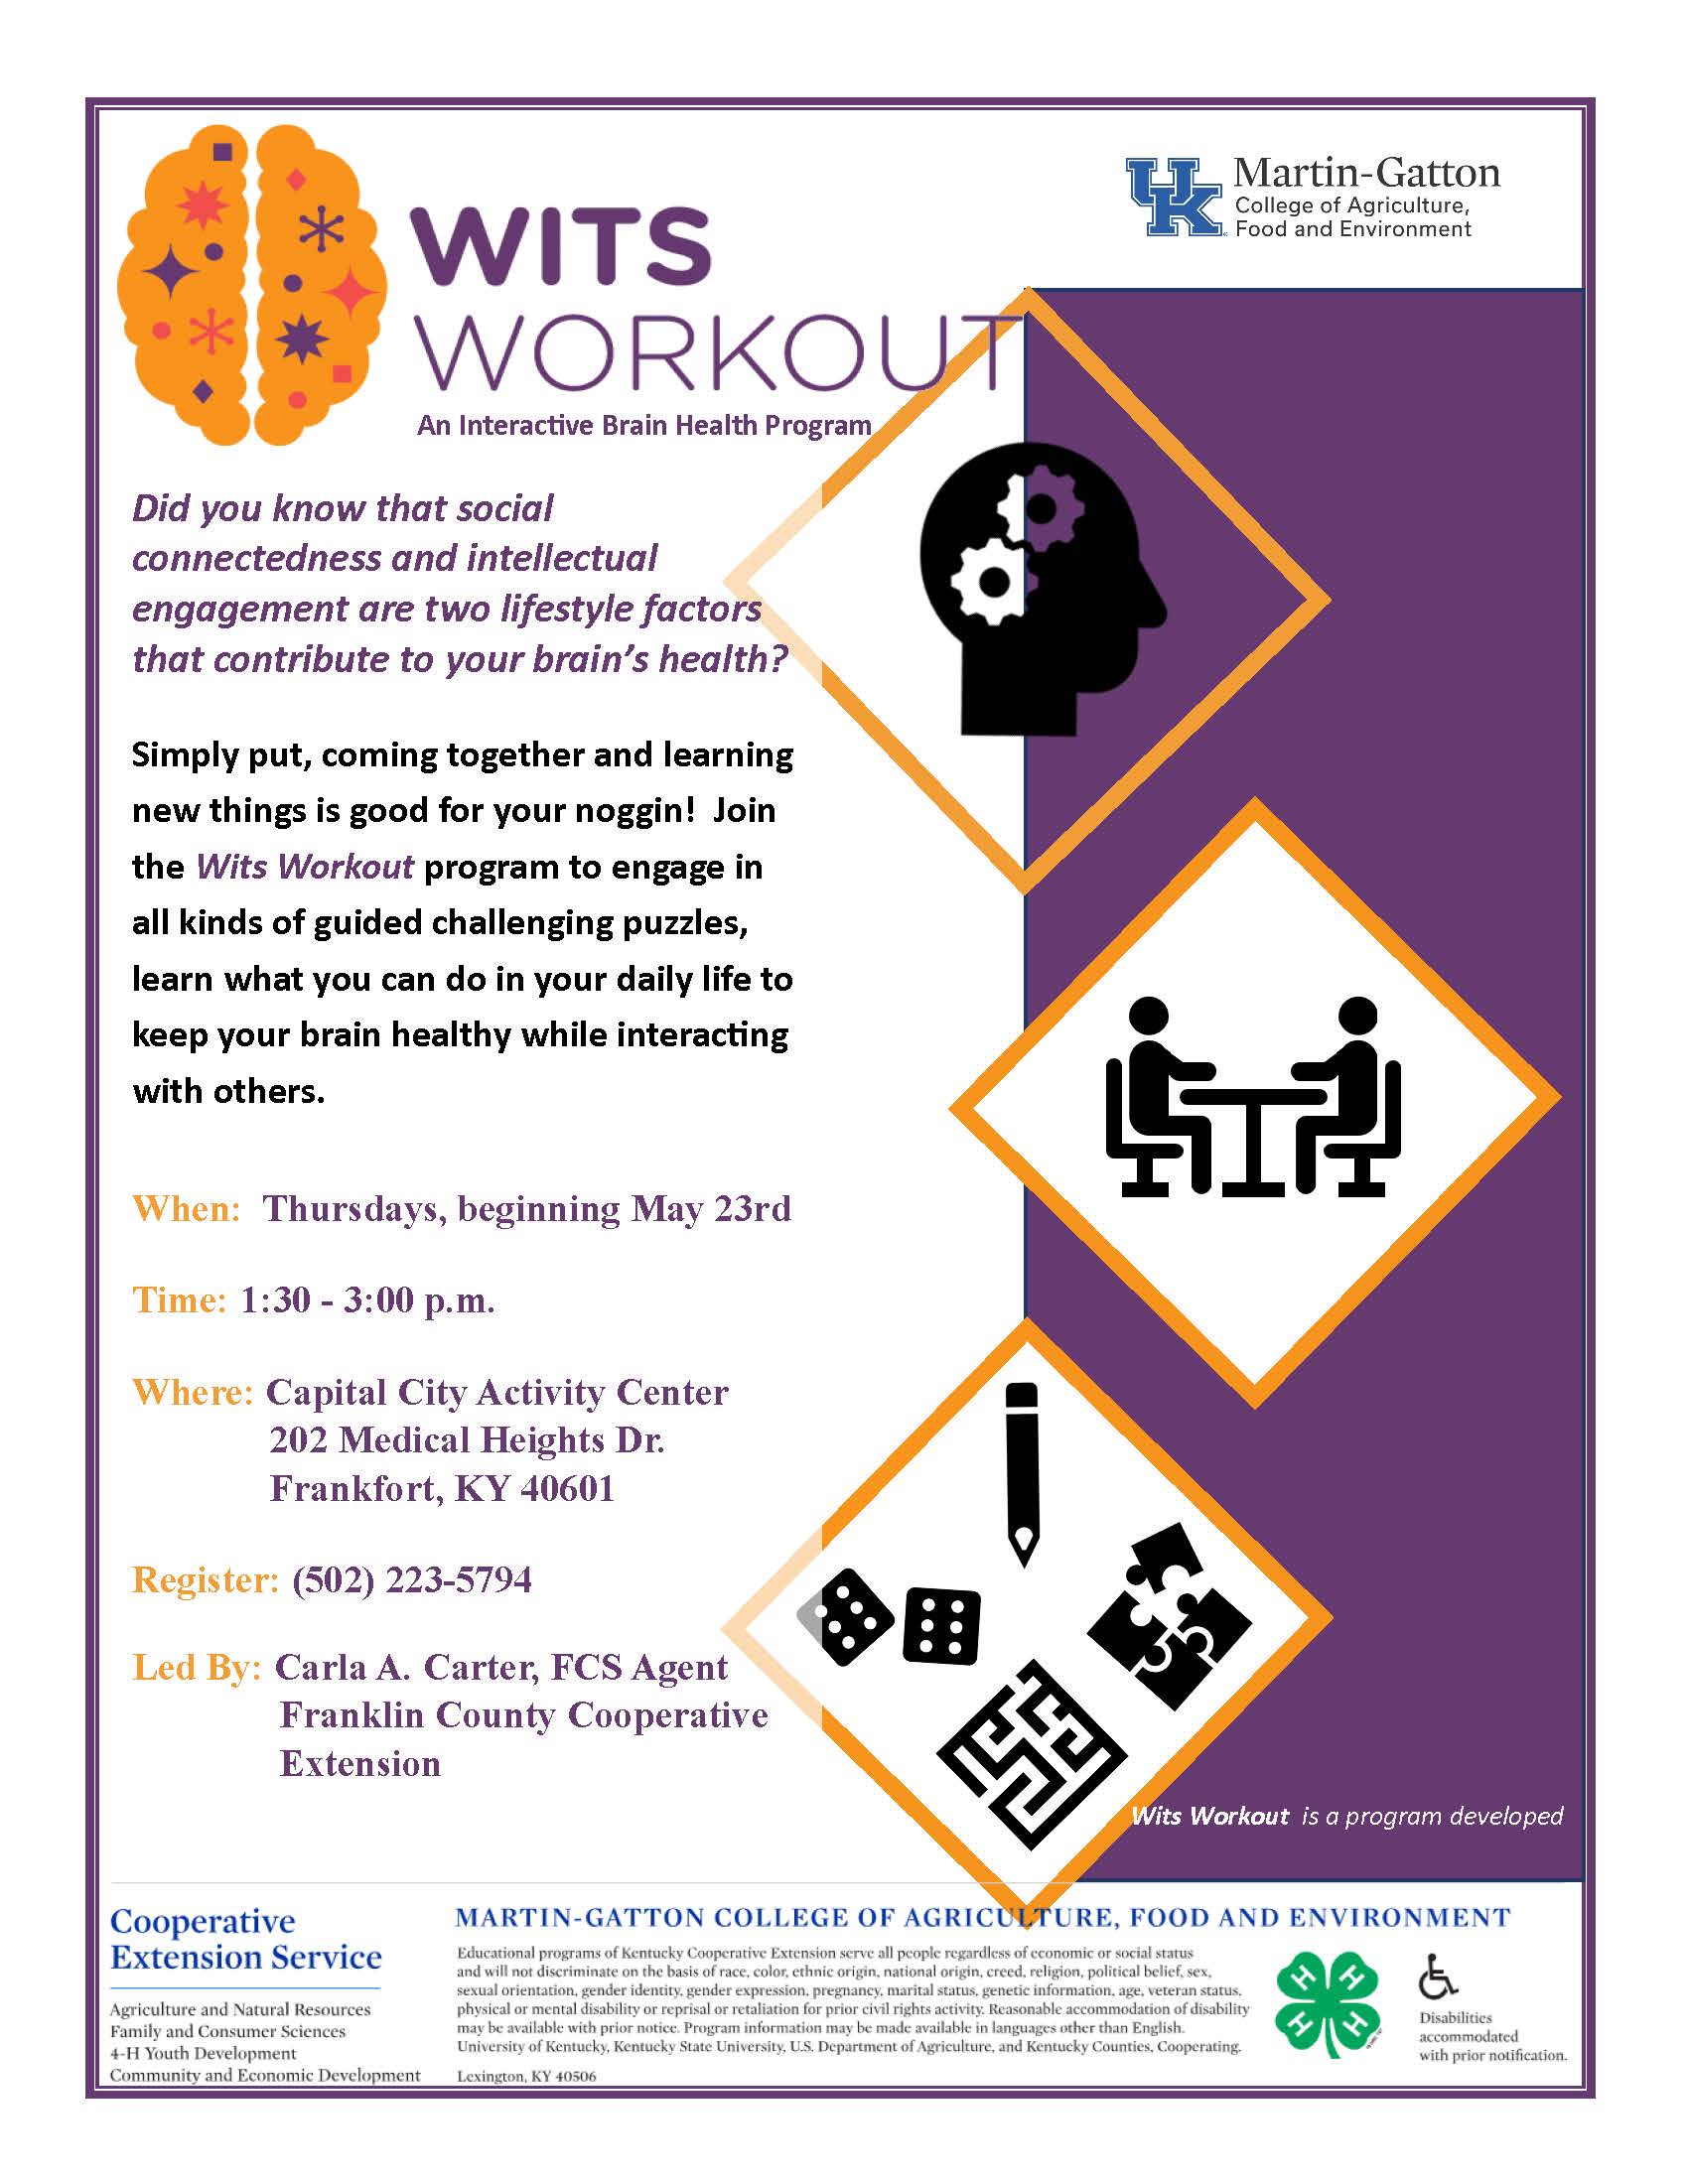 Wits Workout flyer